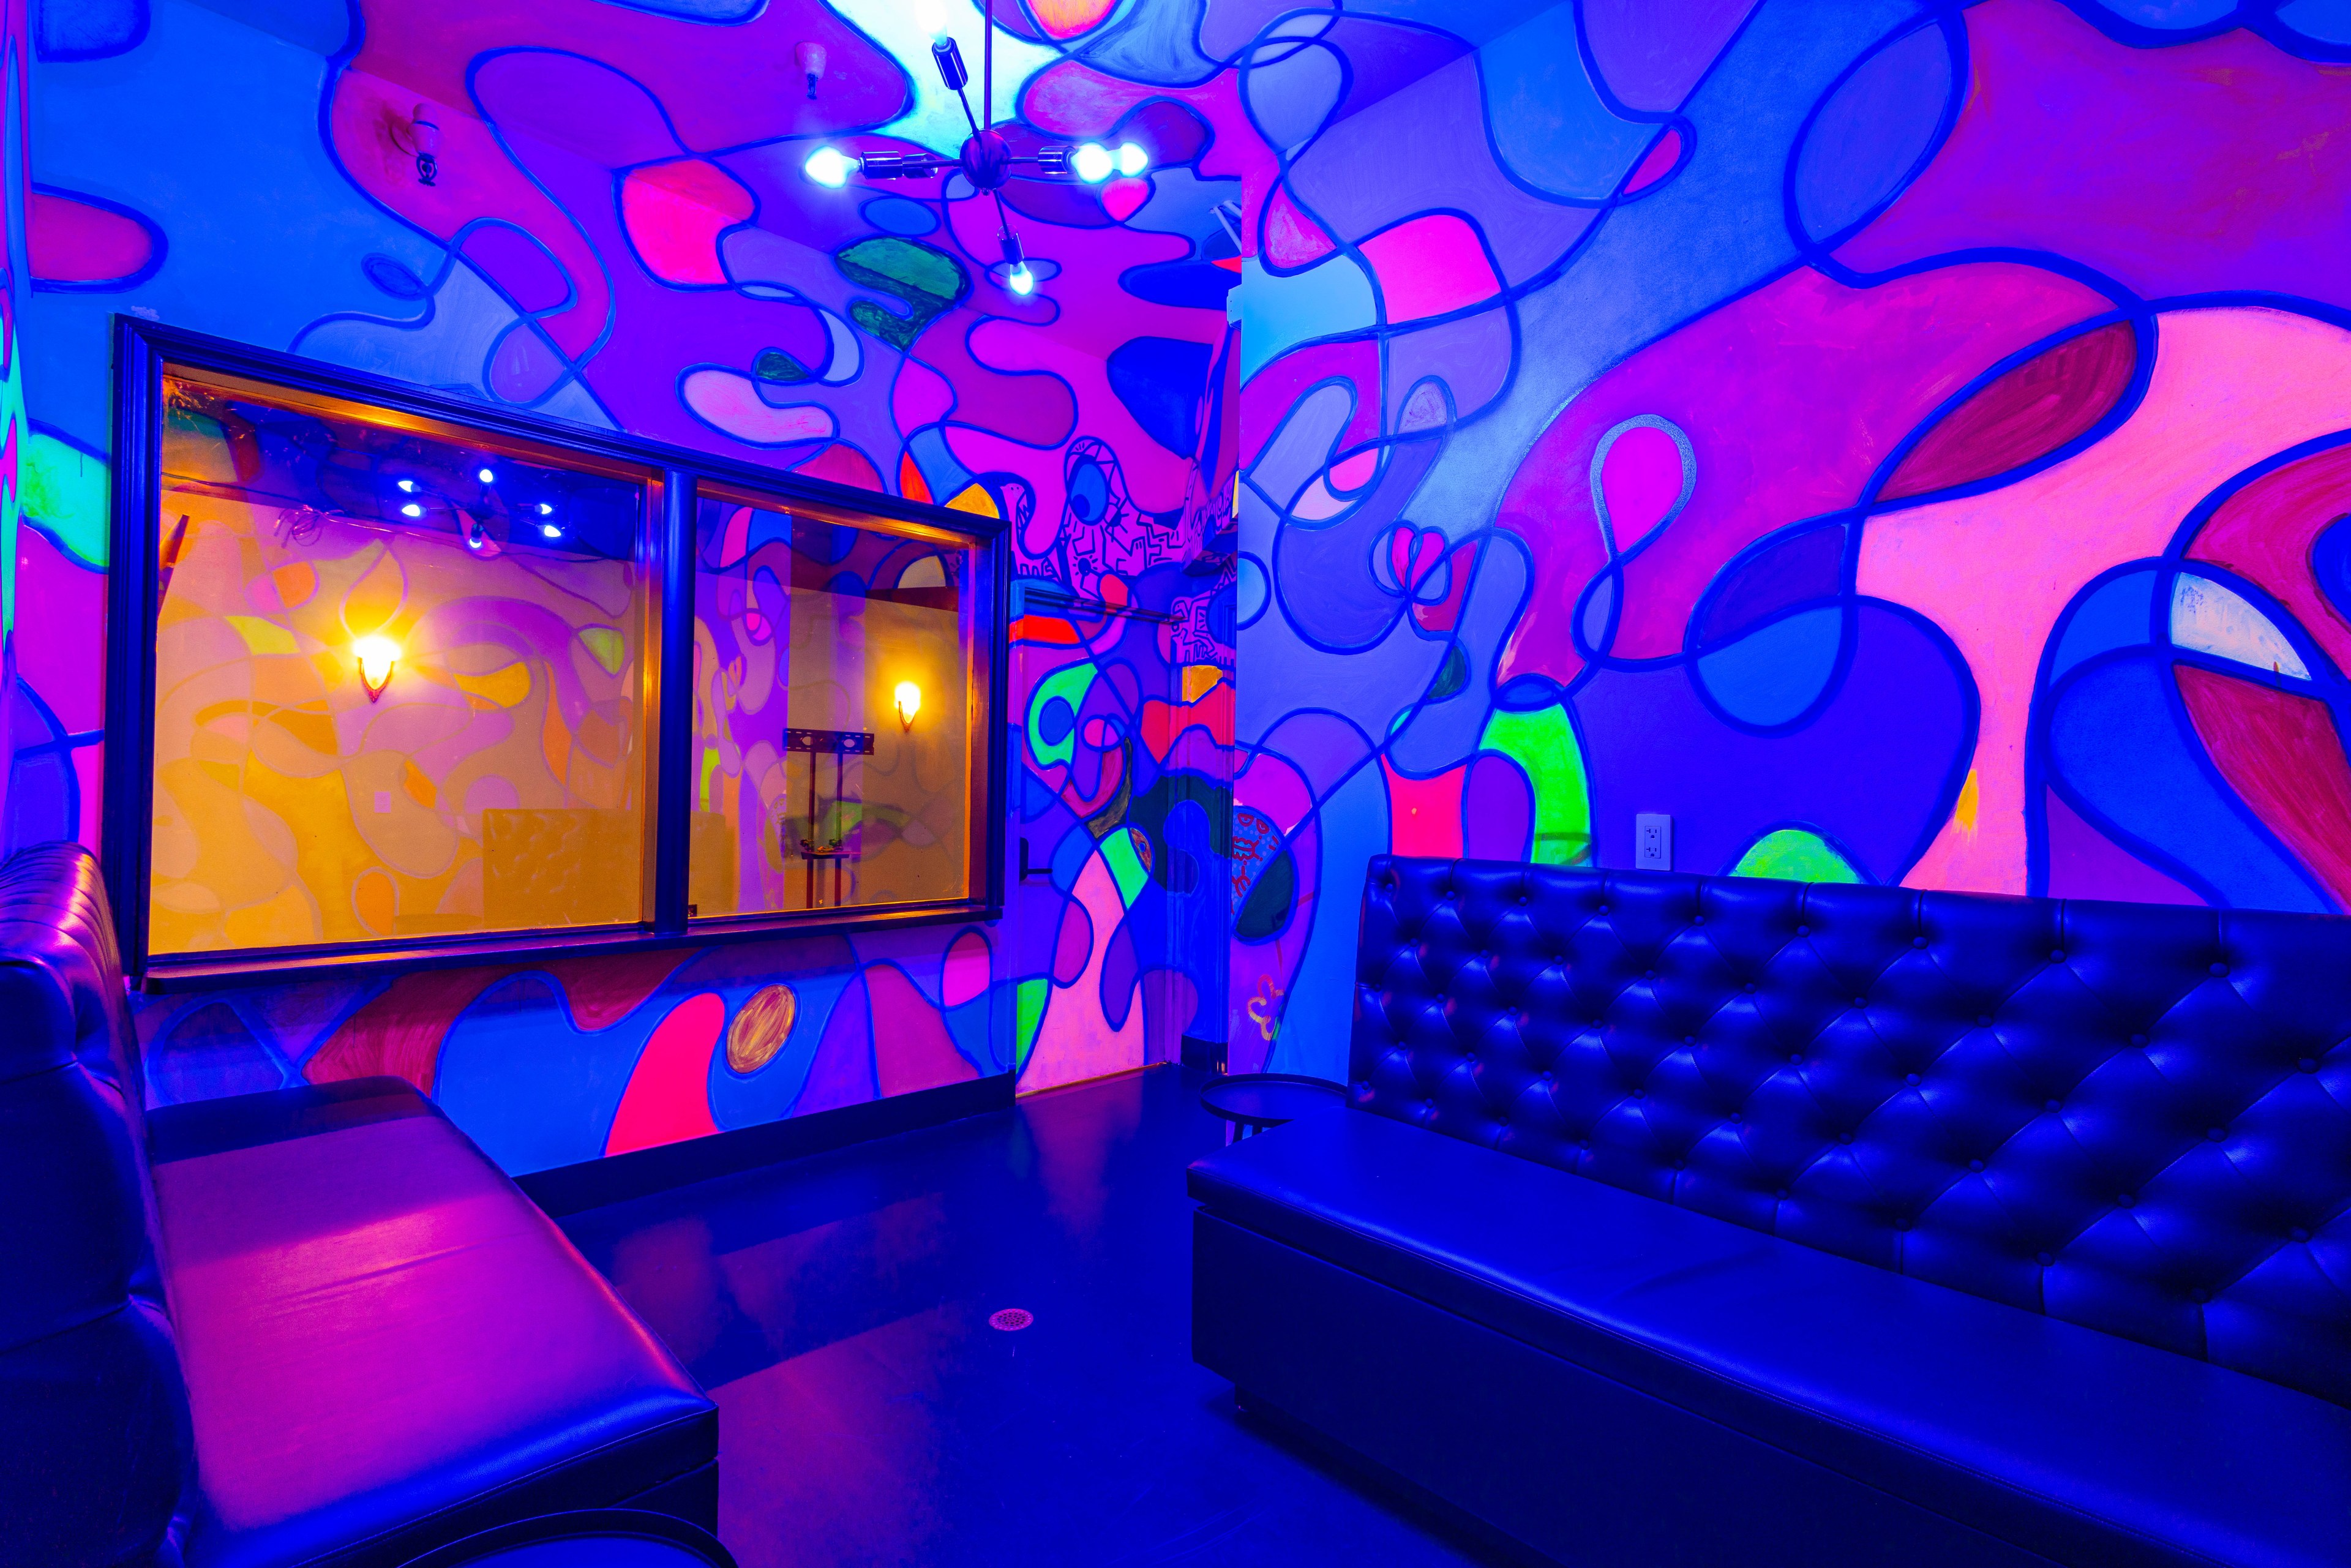 A blacklit mural glows in bright shades of color within a windowed room with a low banquette and couch